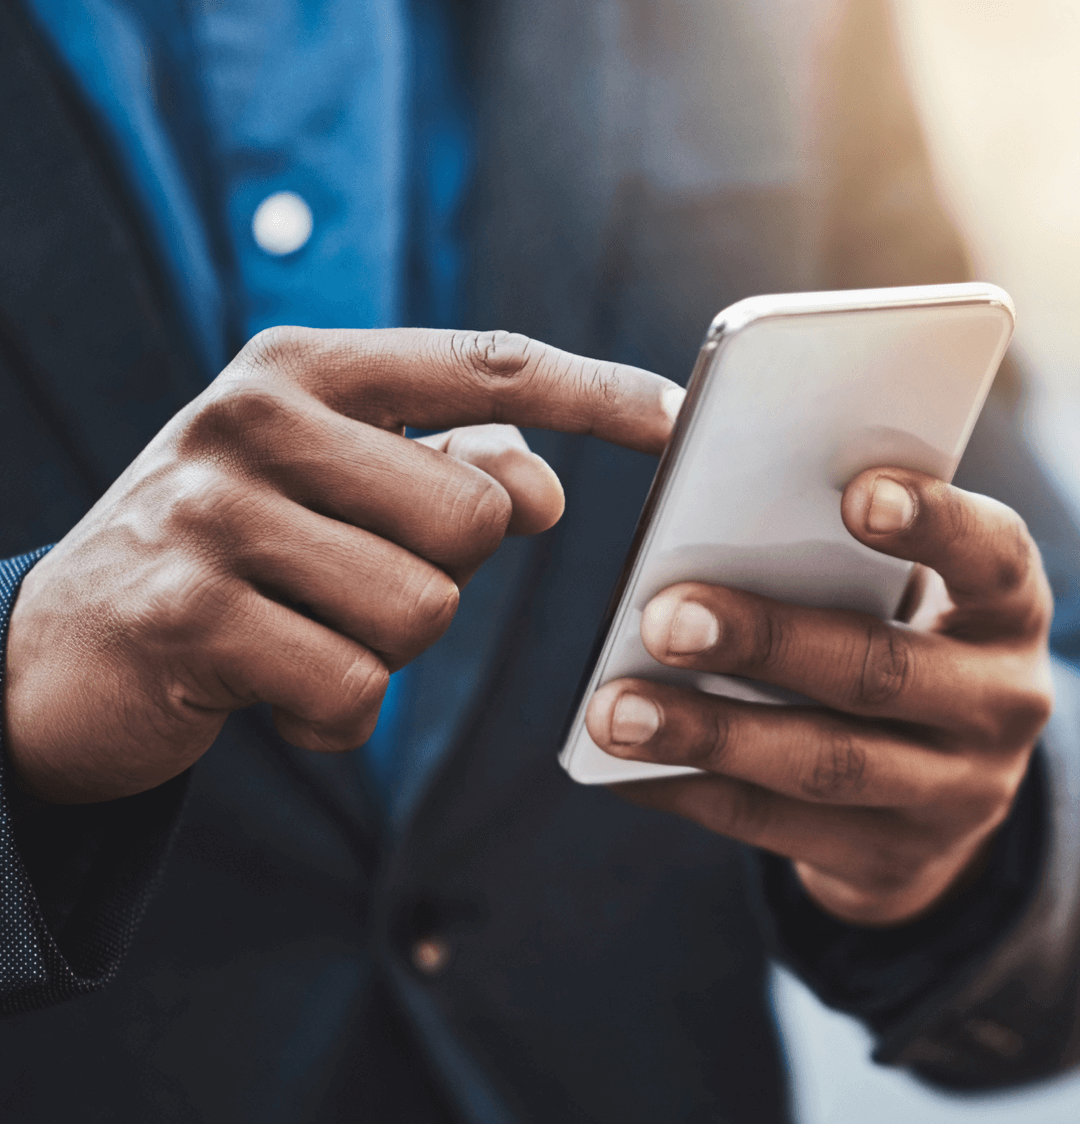 Man taps open real estate SMS message on smartphone